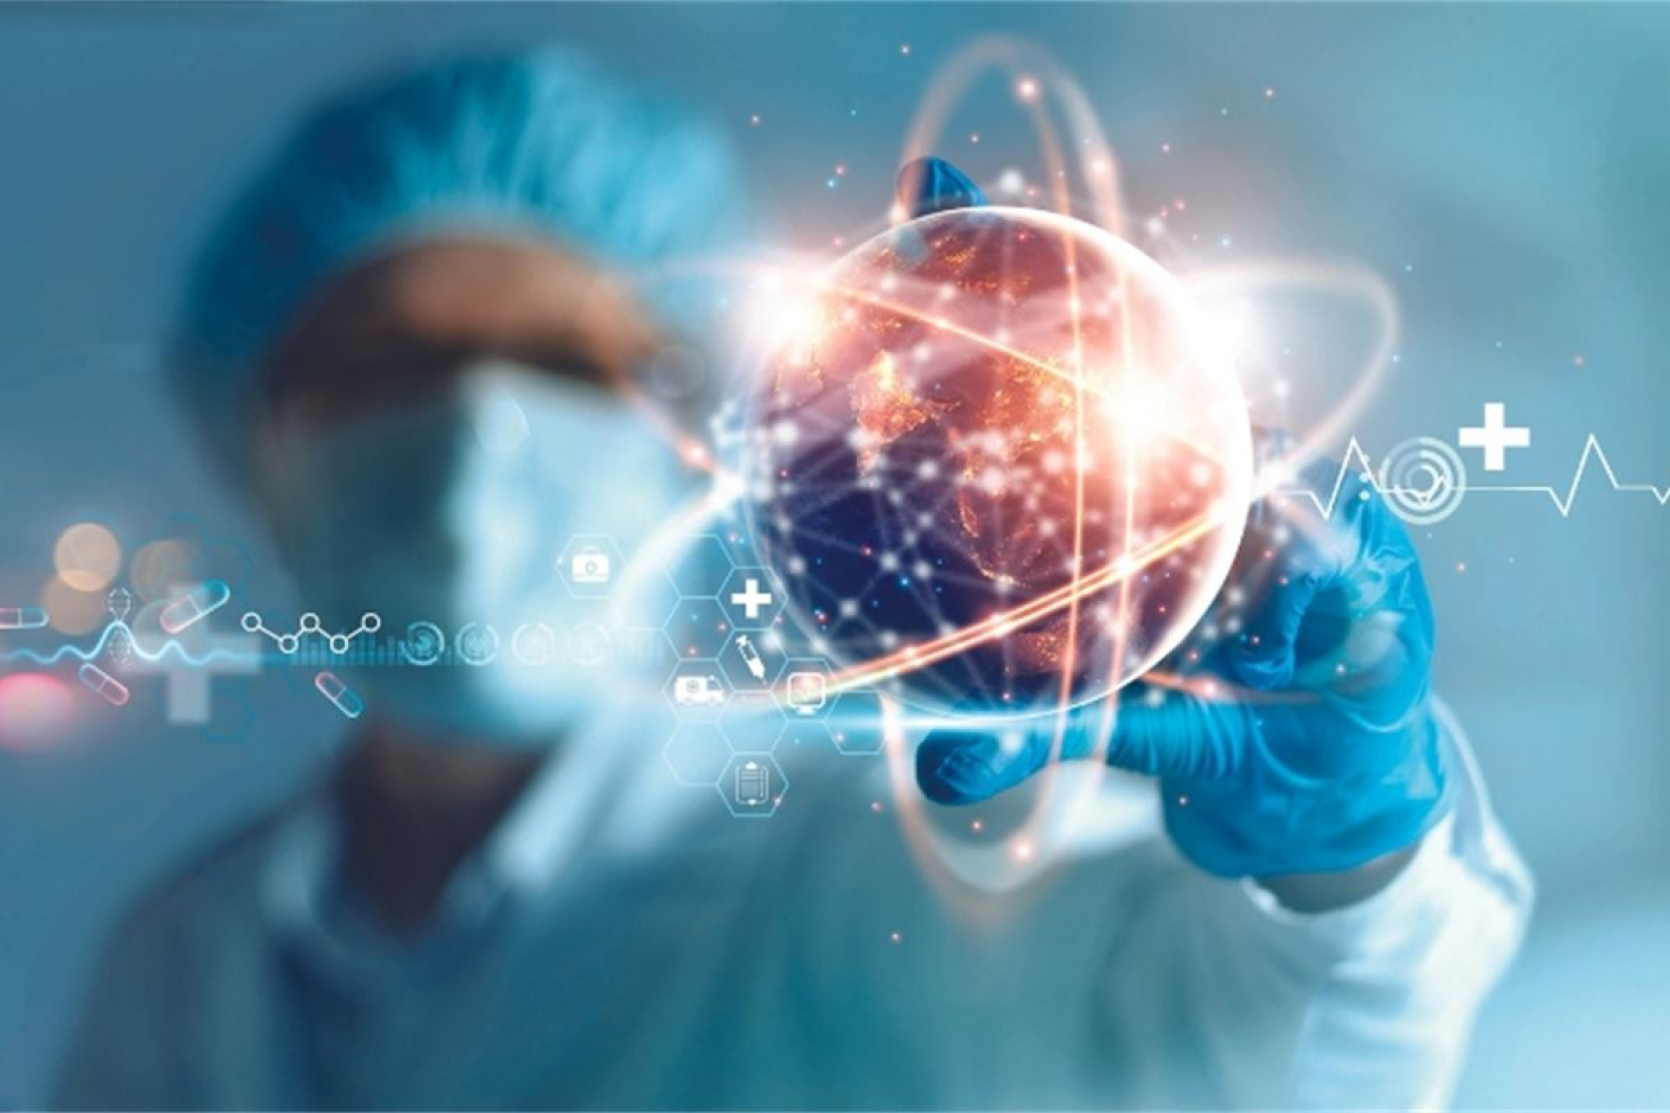 HOW MACHINE LEARNING IS TRANSFORMING THE LIFE SCIENCES INDUSTRY